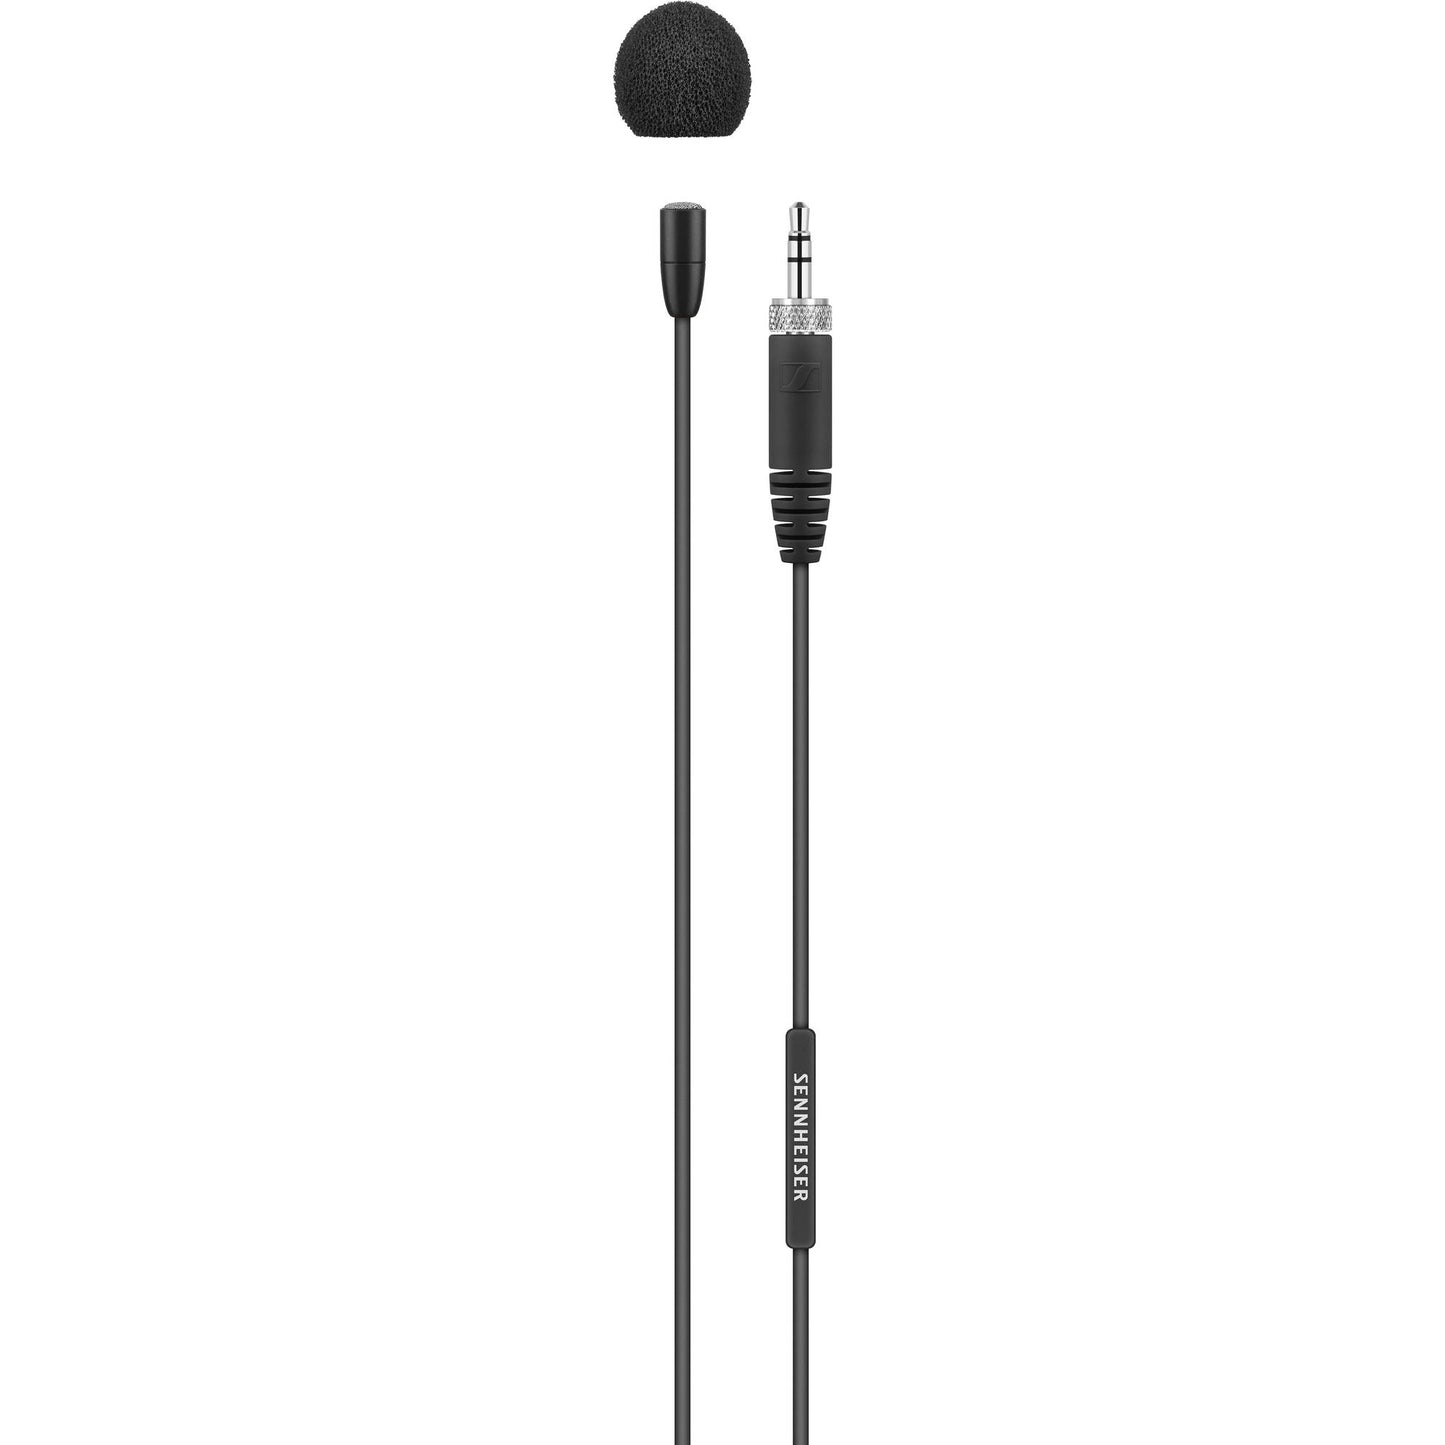 Sennheiser MKE Essential Omnidirectional Mic with 3.5mm Connector - Black